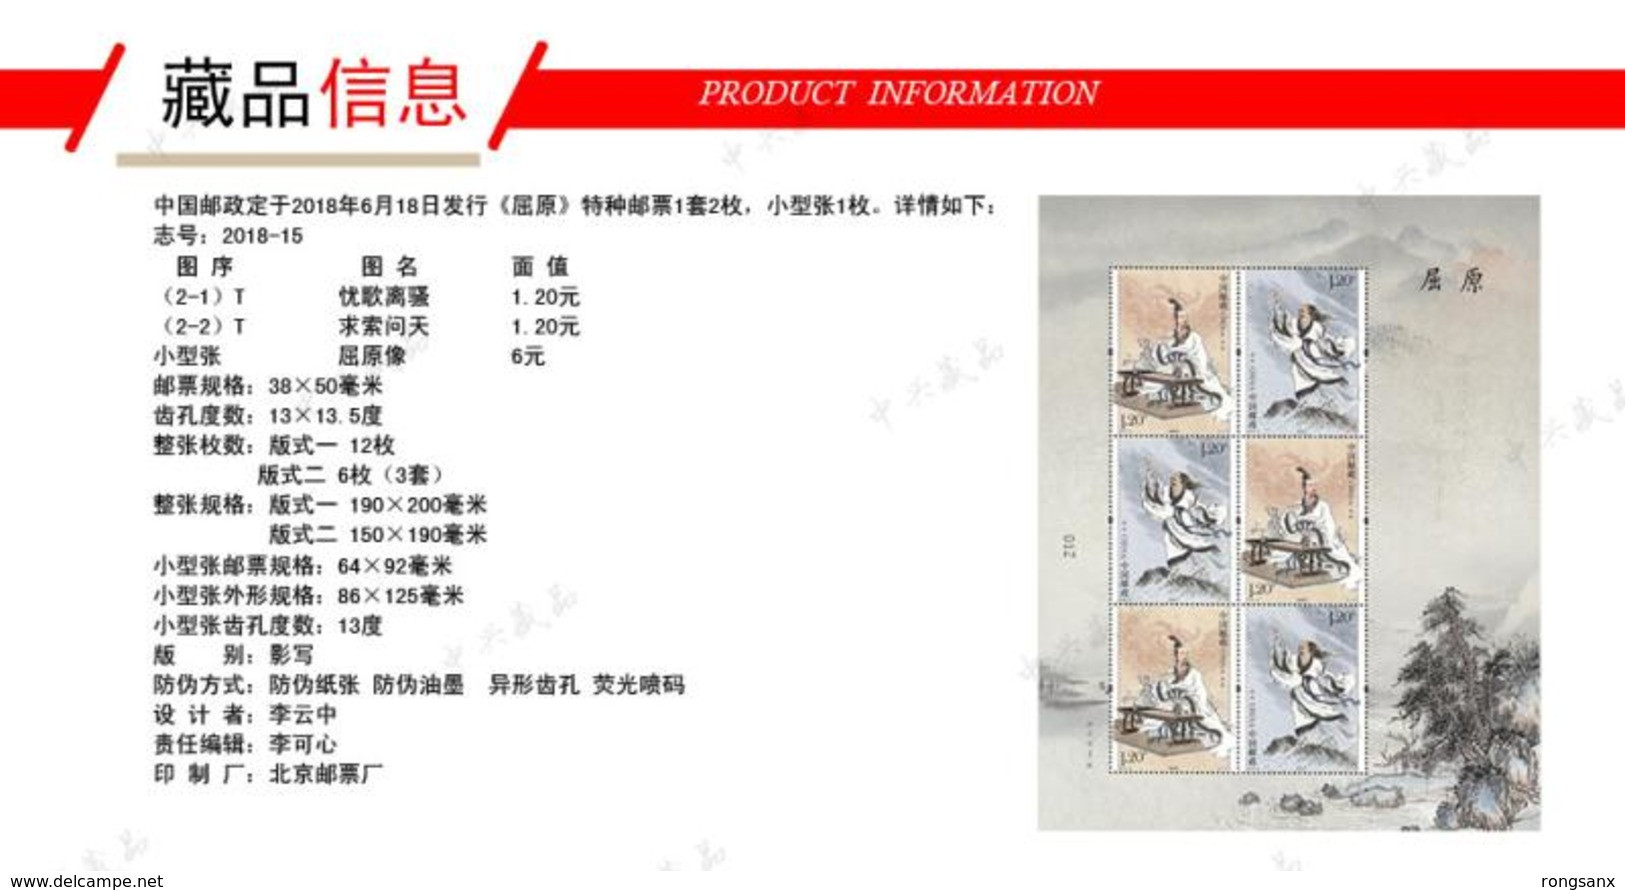 China 2018 SHEETLET YEAR PACK INCLUDE 15 SHEETLETS SEE PIC INCLUDE ALBUM